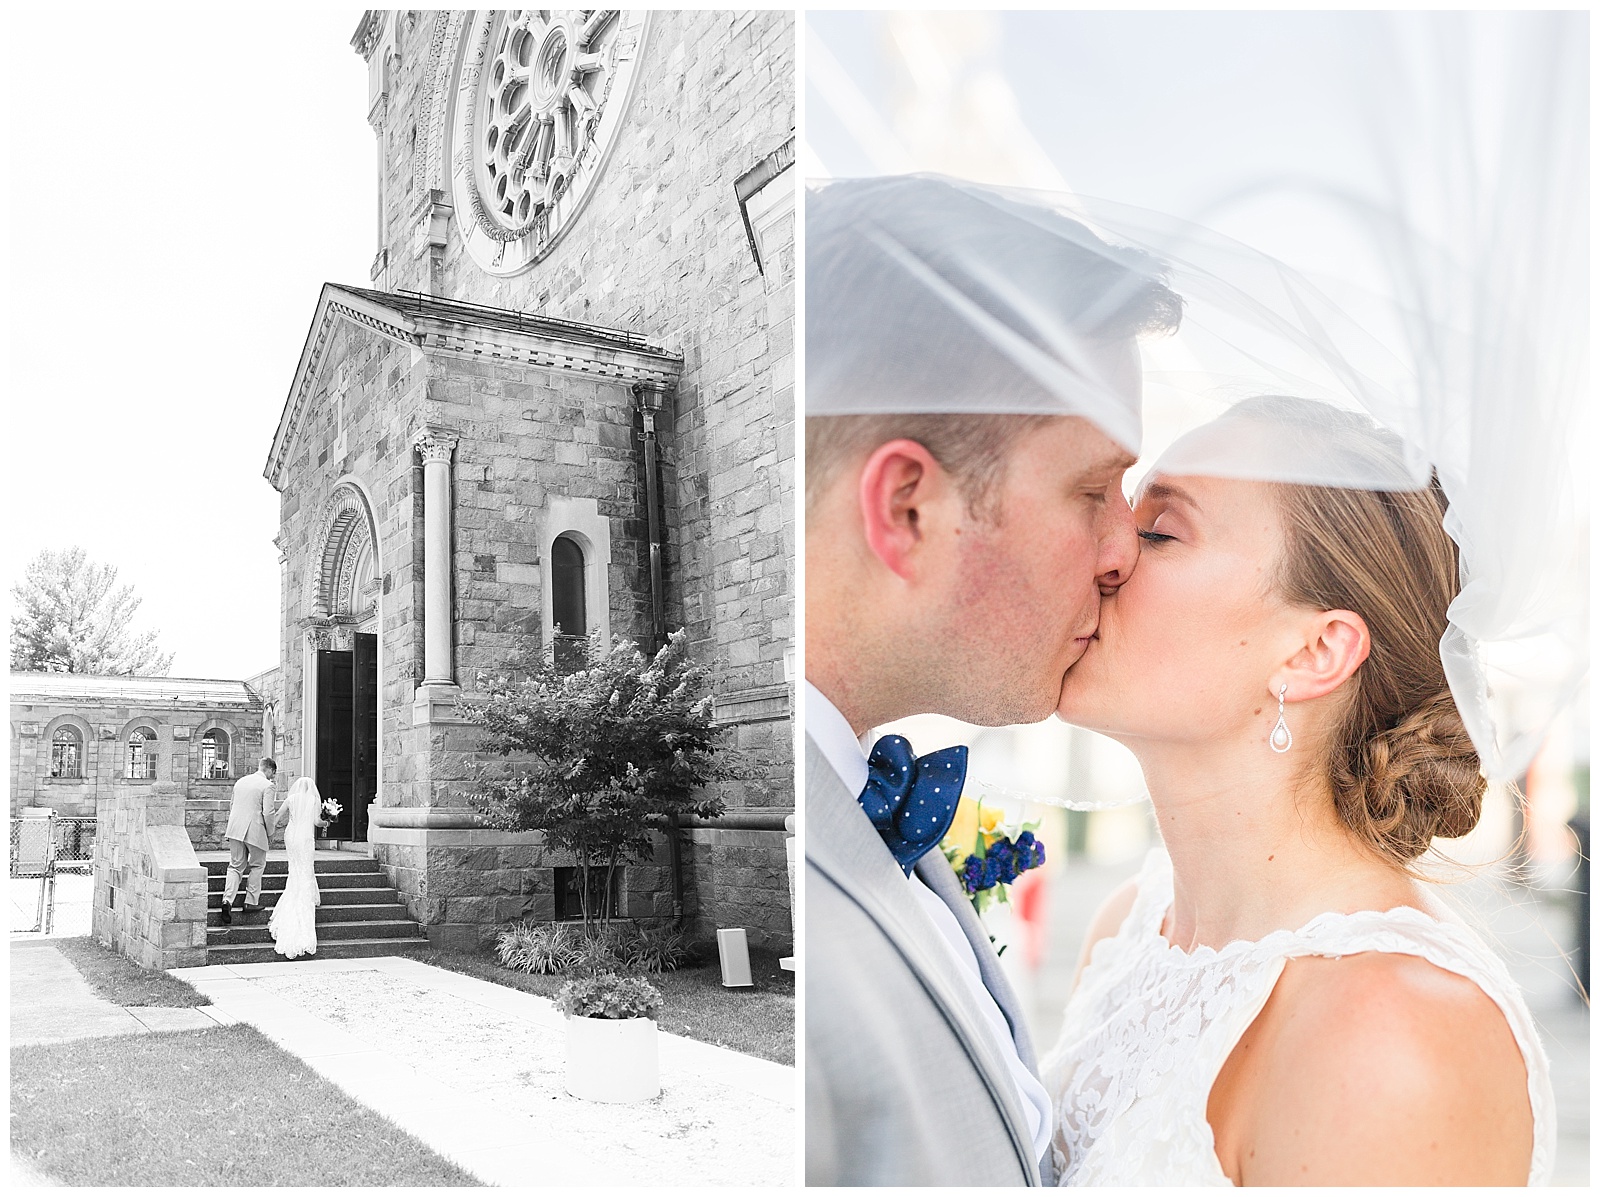 kissing under veil and walking up stone steps outside of gorgeous big church